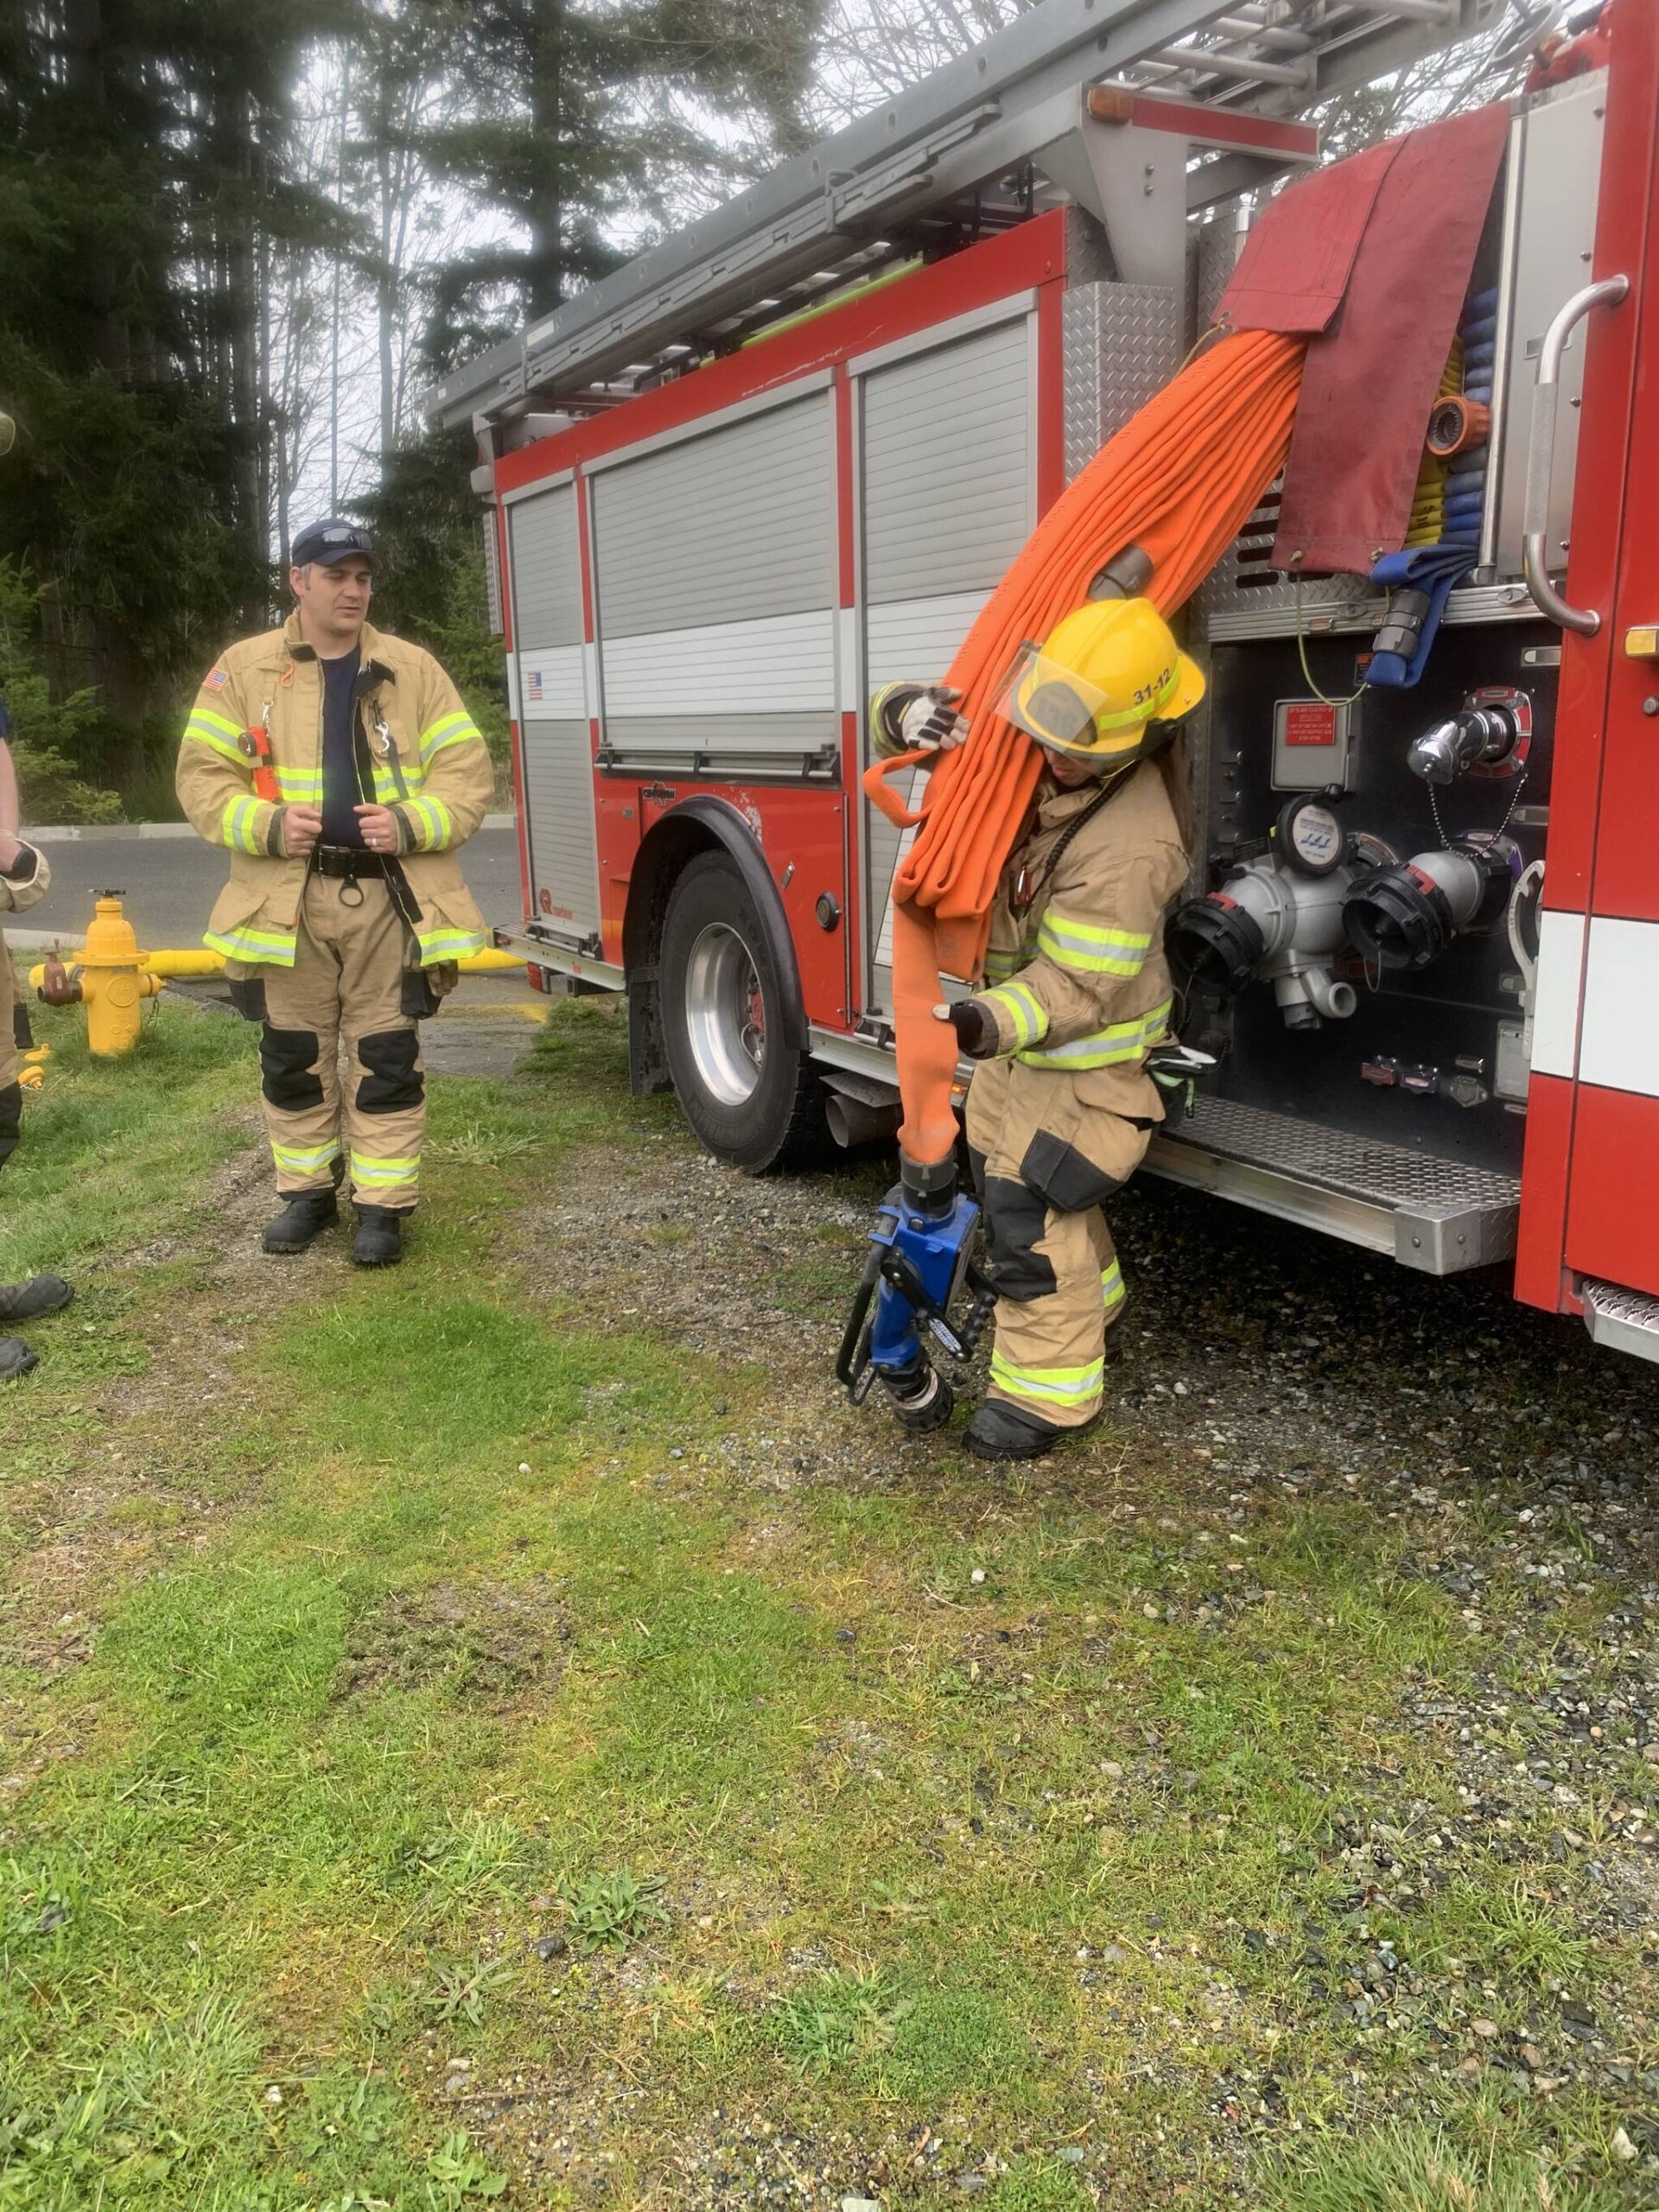 Firefighters participate in training exercises. (Photo by South Whidbey Fire/EMS)